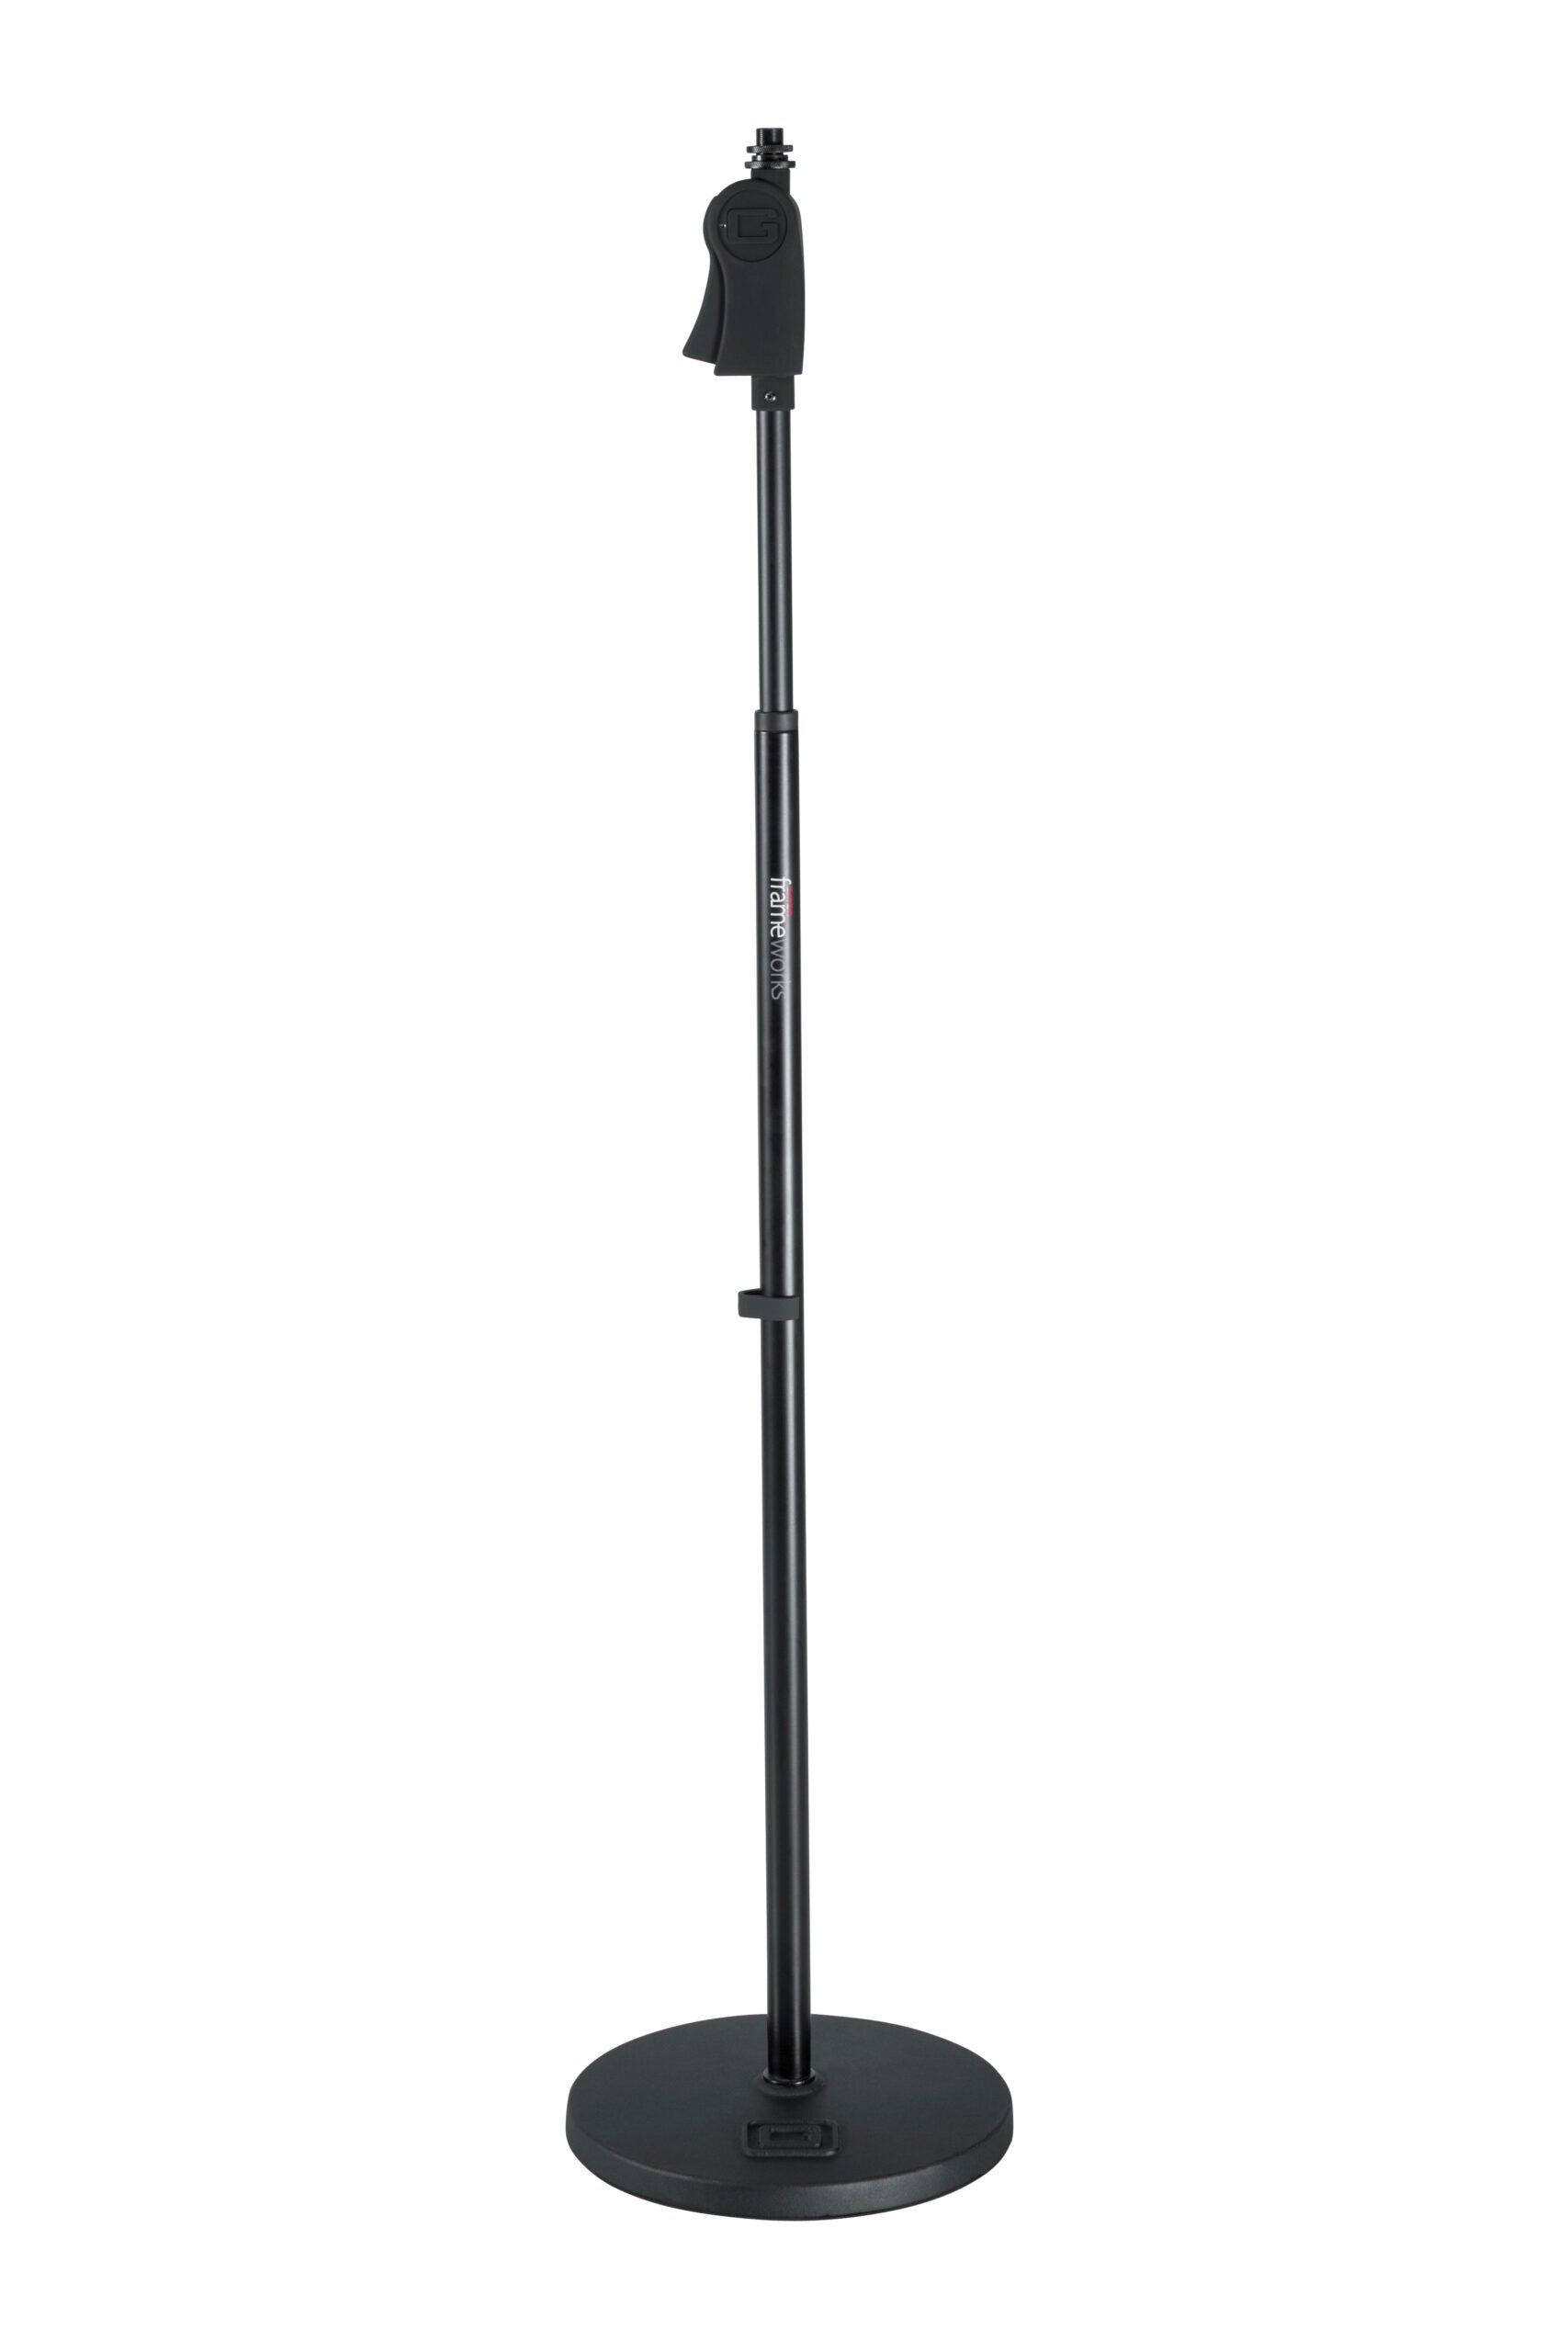 Gator Frameworks | Deluxe 10" Round Base Mic Stand